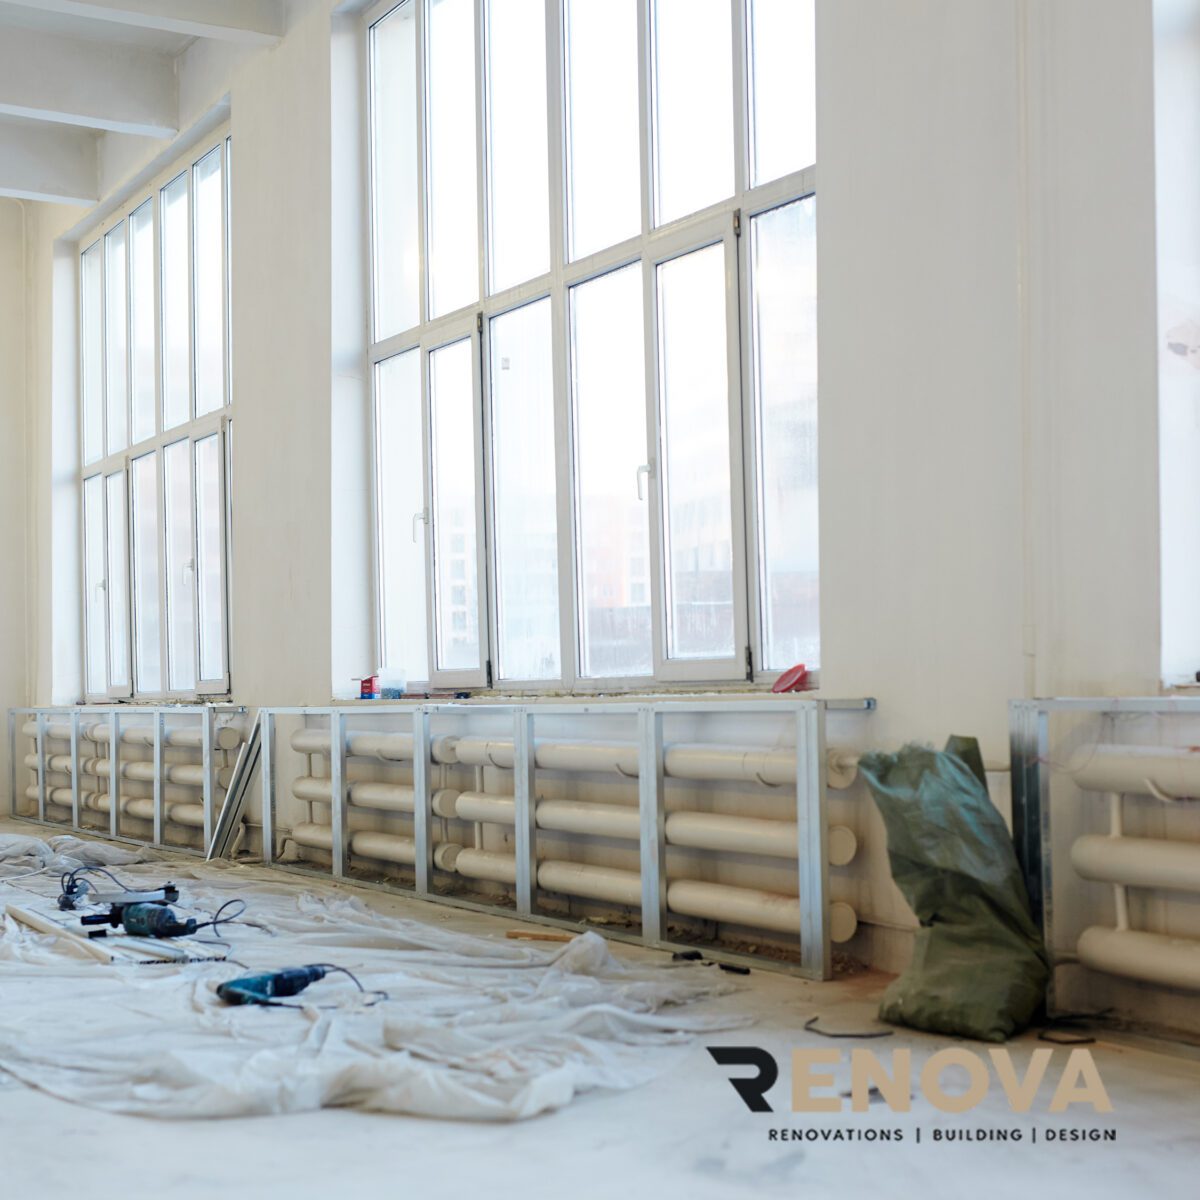 Commercial Renovations: What Can Renova Do for Your Business